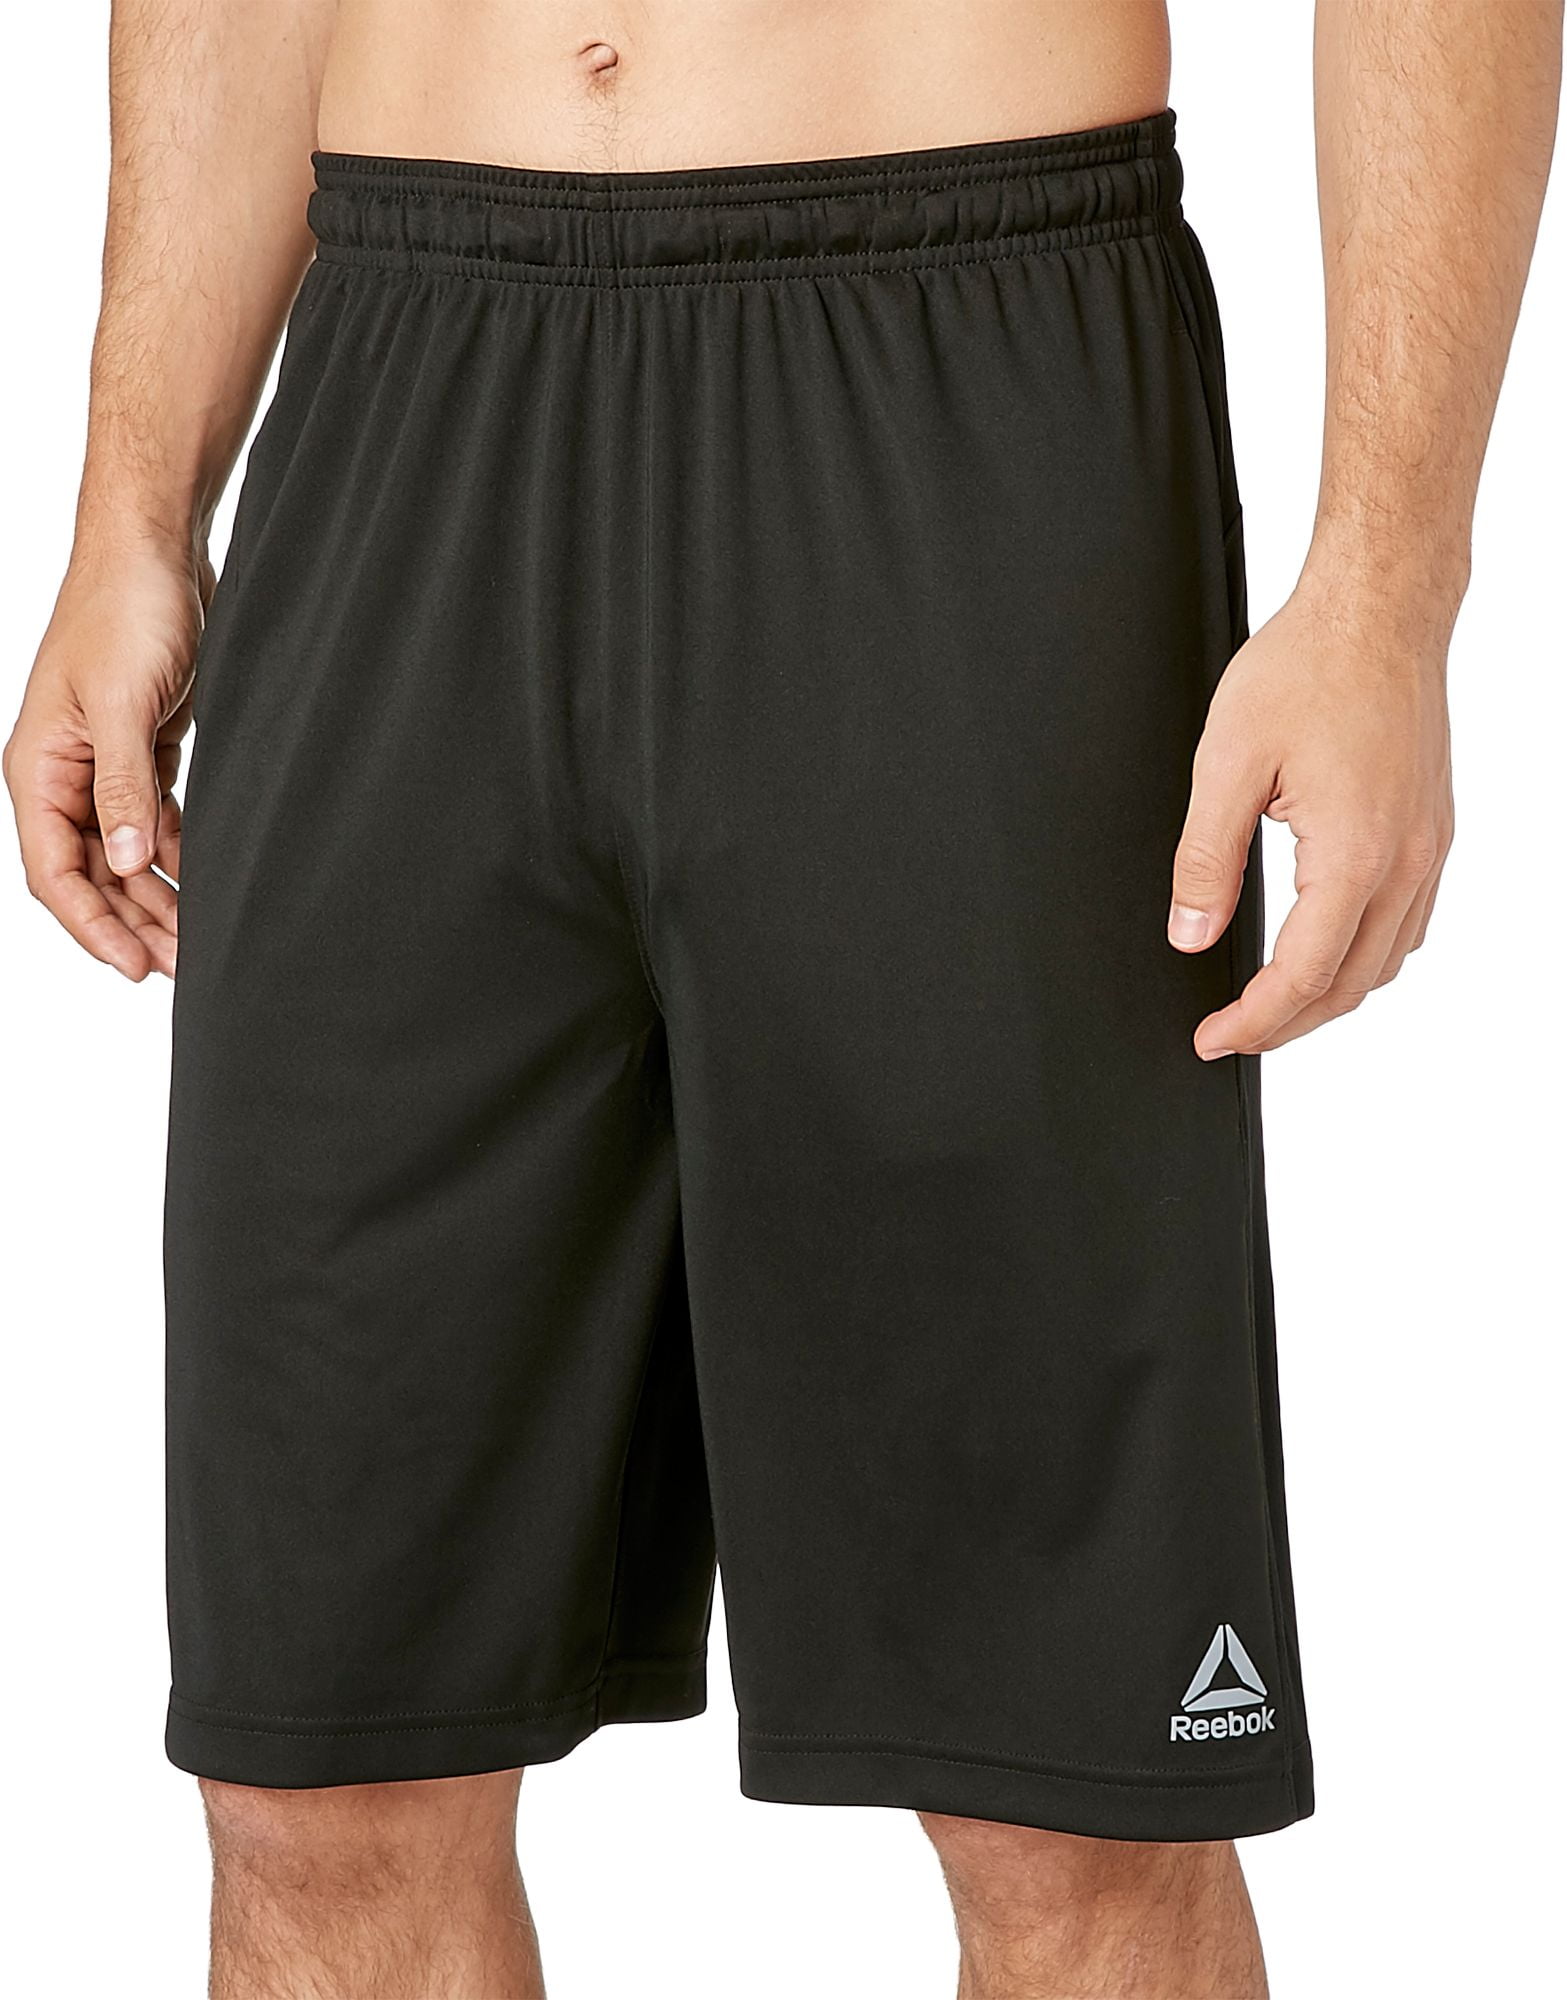 Solid Performance Shorts 